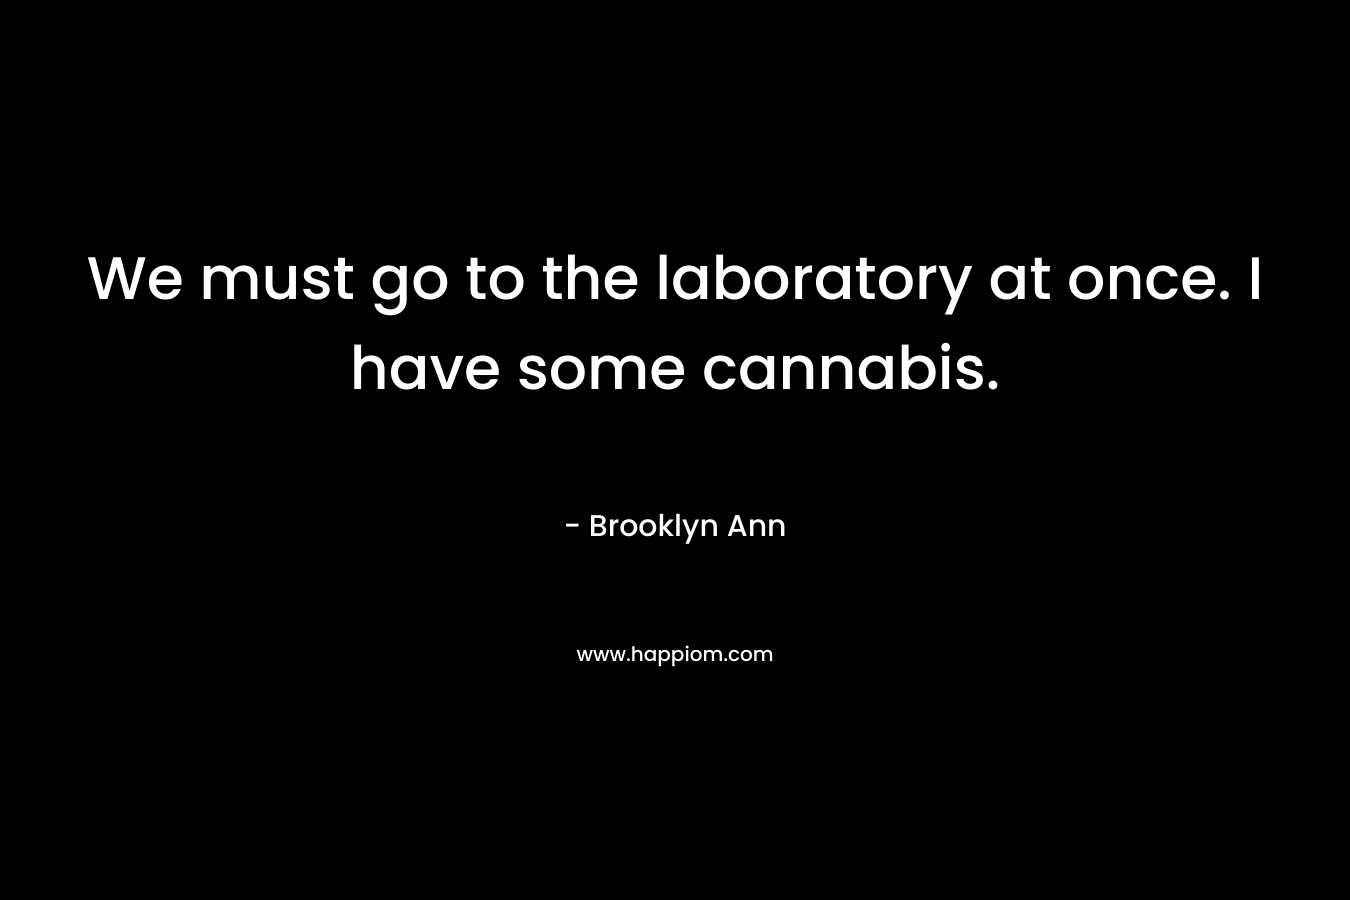 We must go to the laboratory at once. I have some cannabis. – Brooklyn Ann